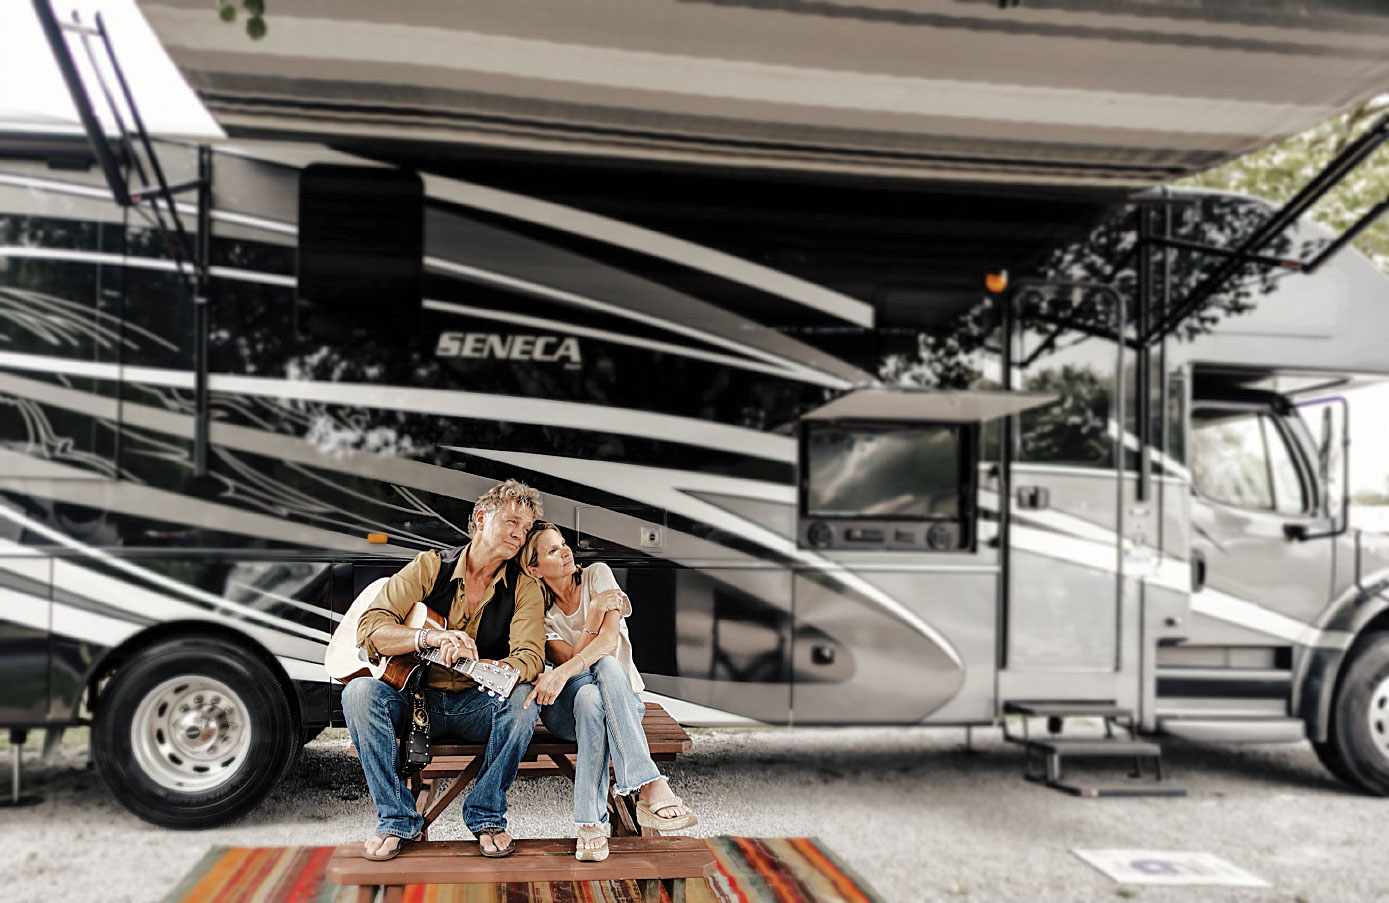 John Schneider with wife and RV